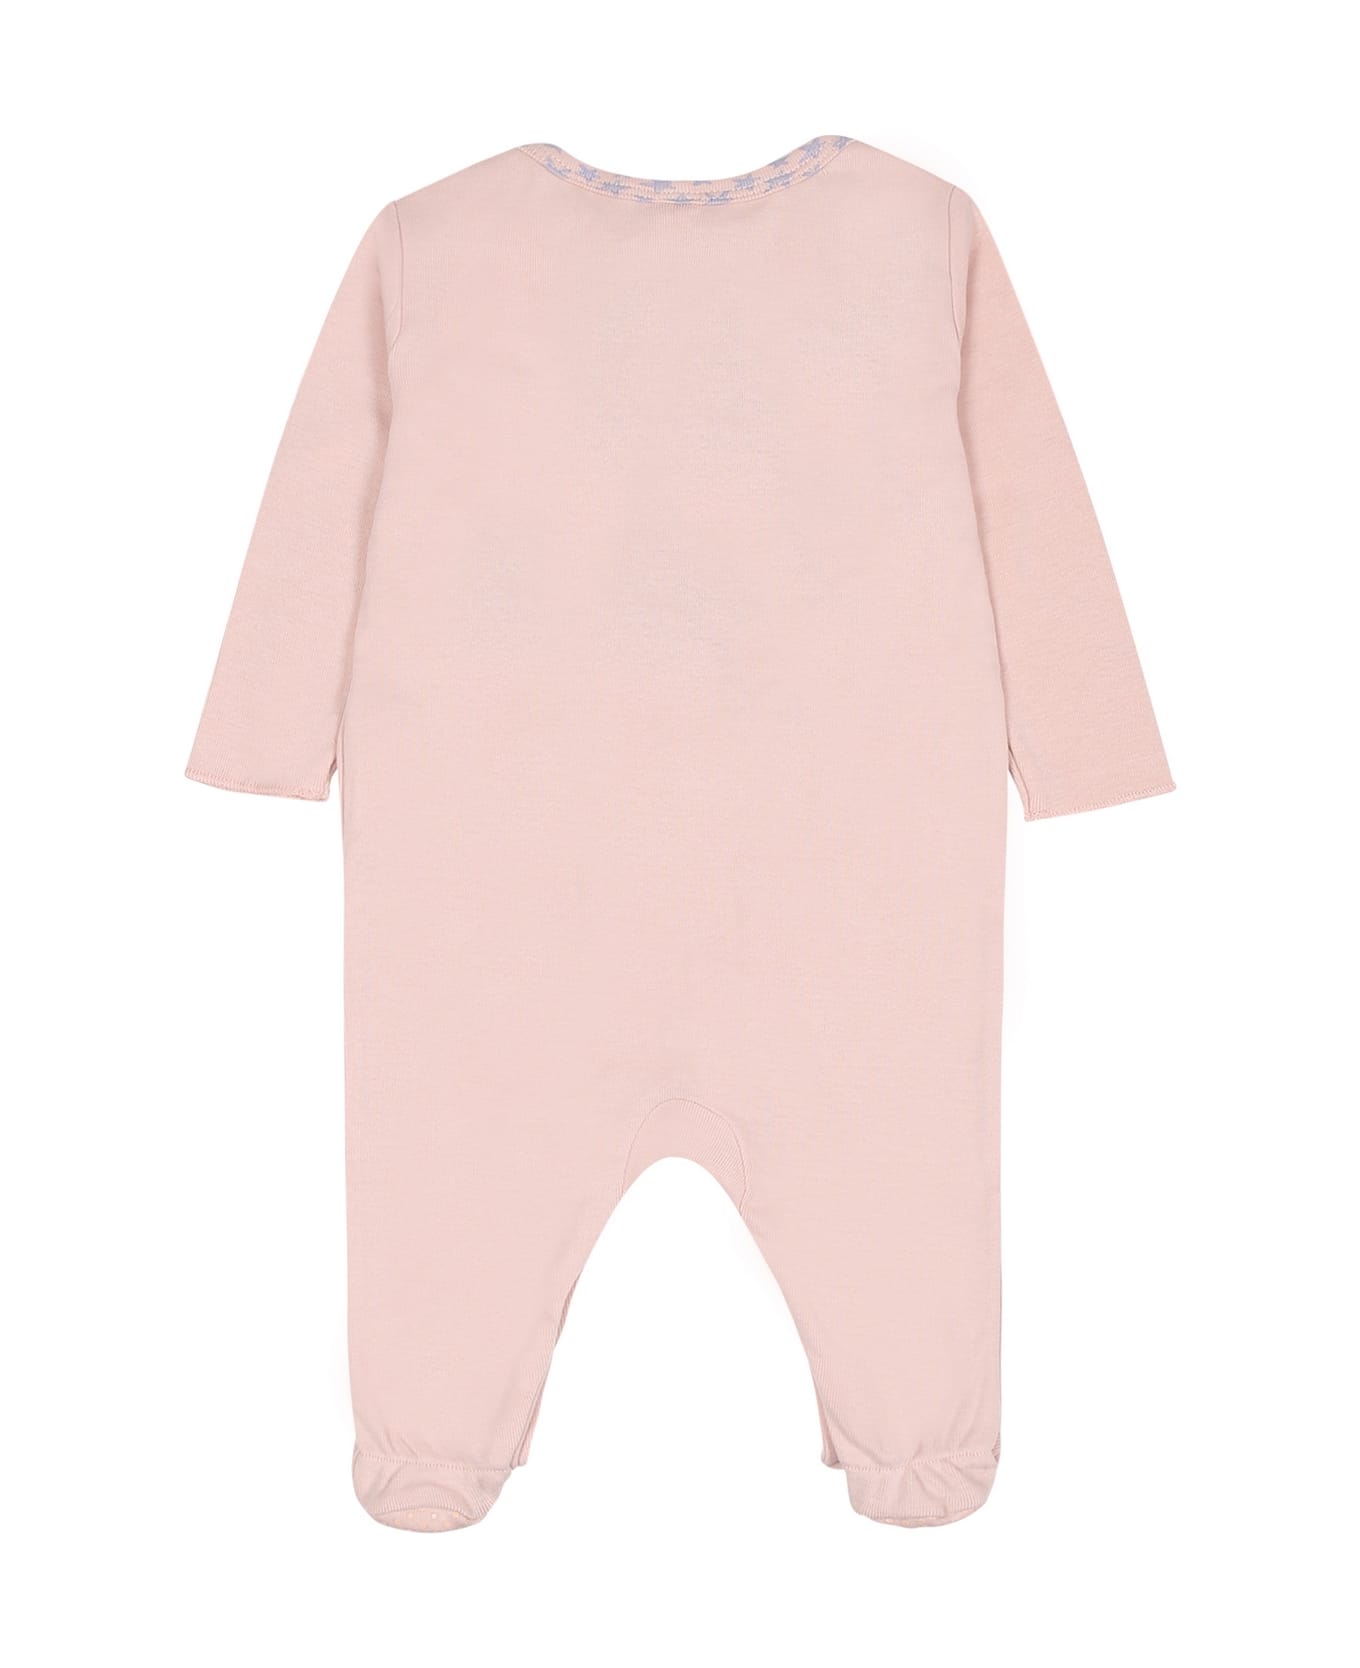 Stella McCartney Kids Pink Set For Baby Girl With Printed Unicorn - Pink